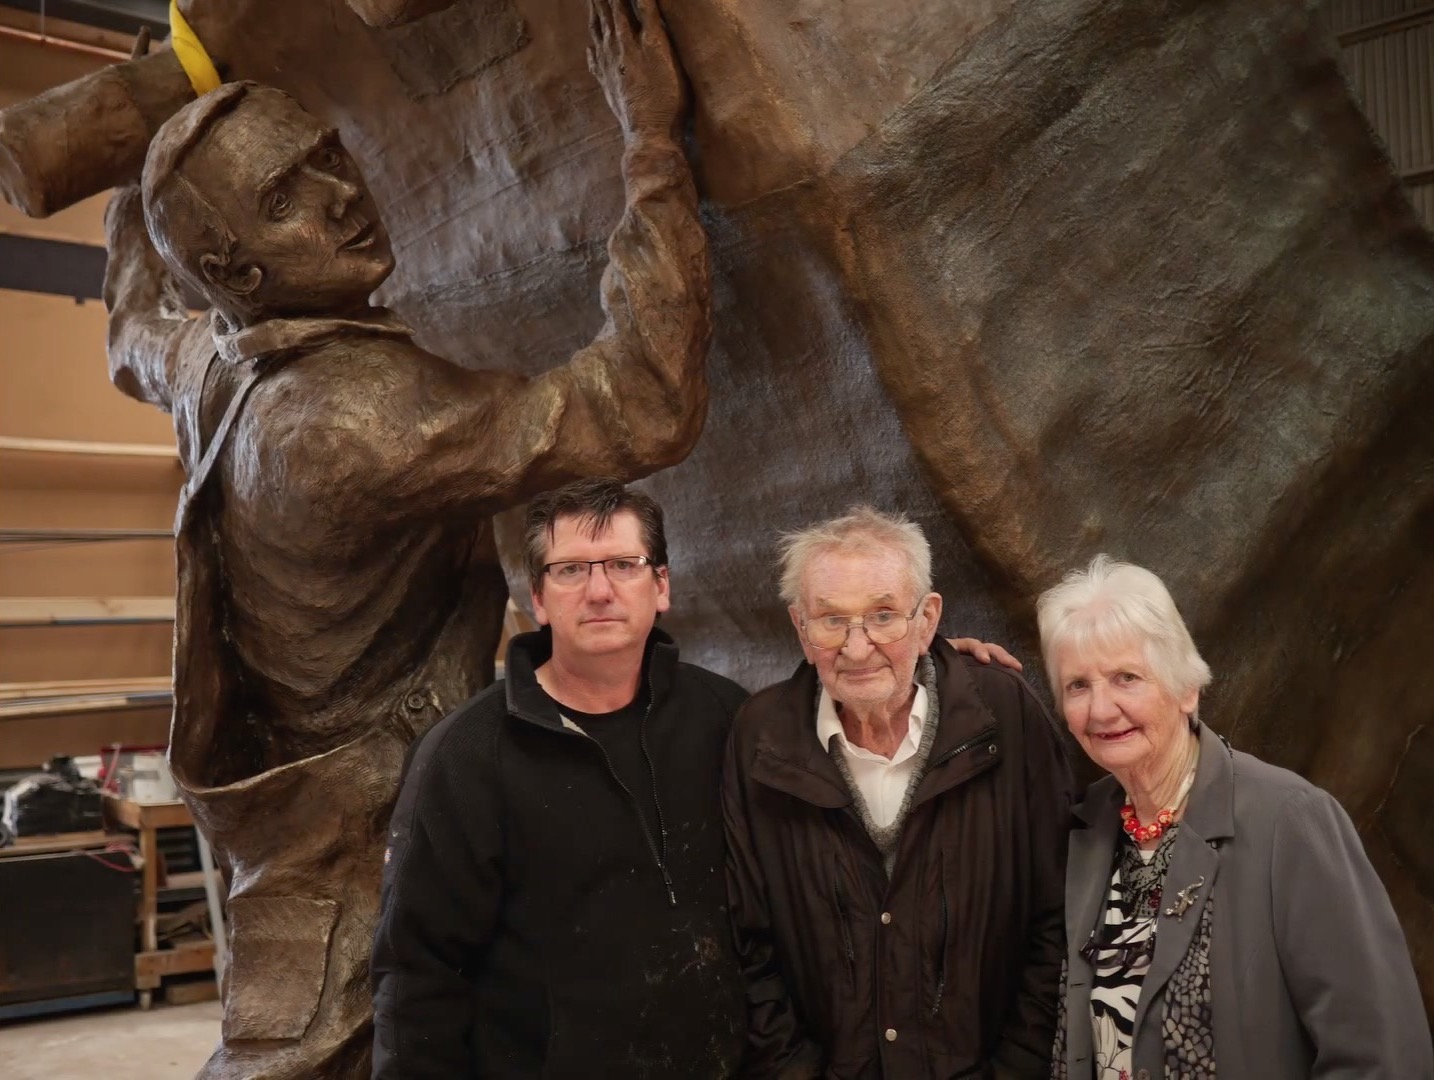 John Kelly with his parents, Ben and Margaret, in the Fundere Foundry, Sunshine, Melbourne